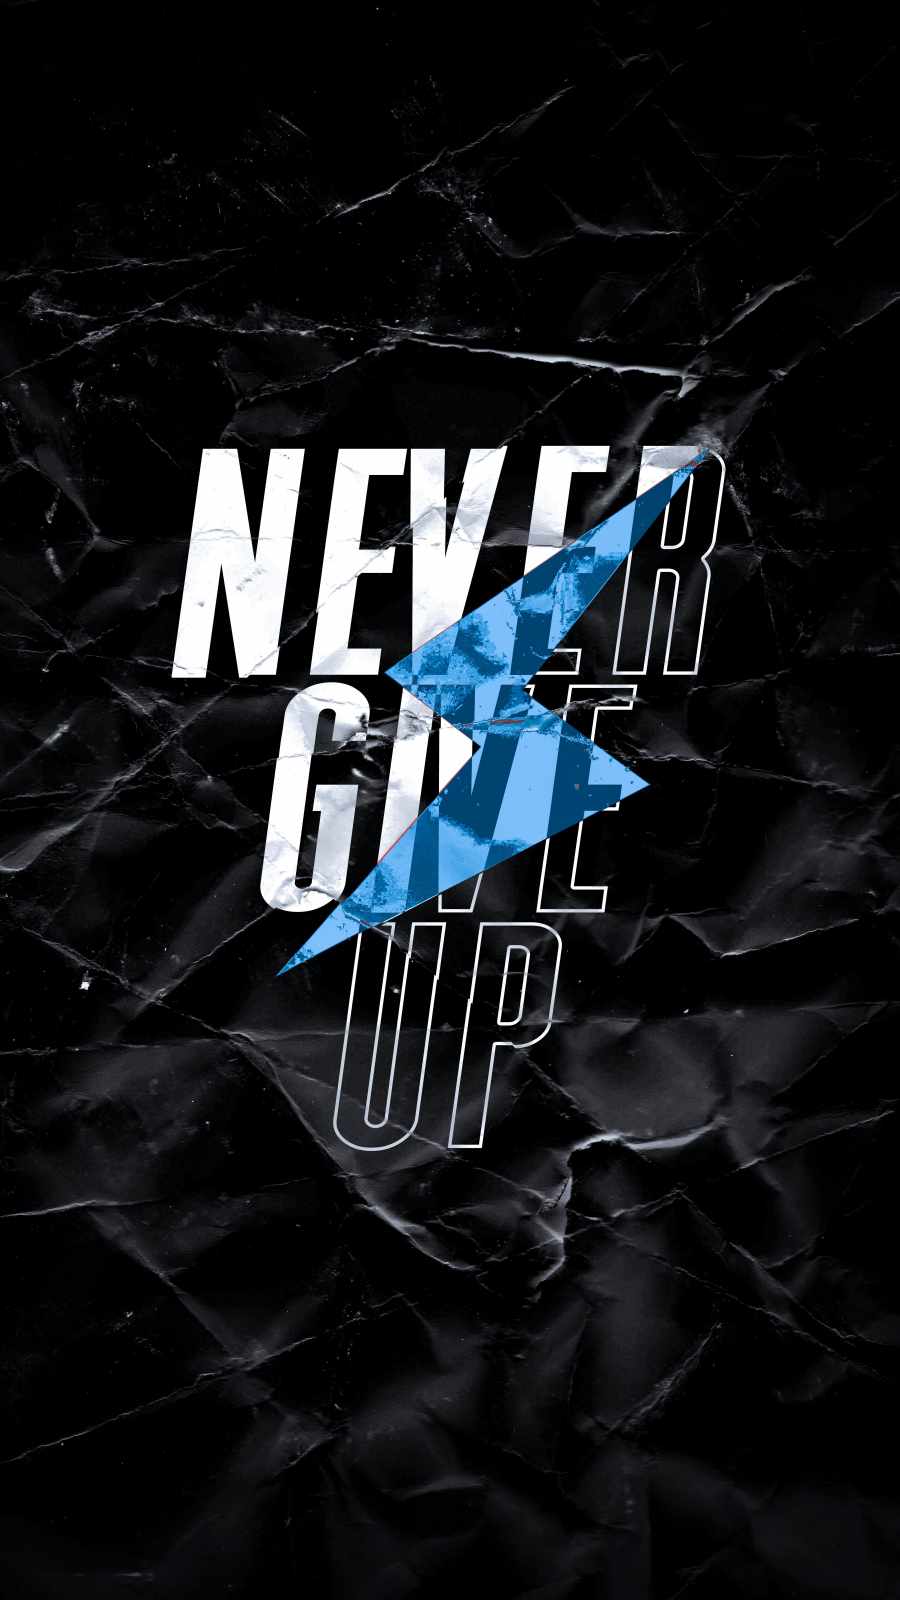 Never Give Up Ever IPhone Wallpaper - IPhone Wallpapers : iPhone Wallpapers